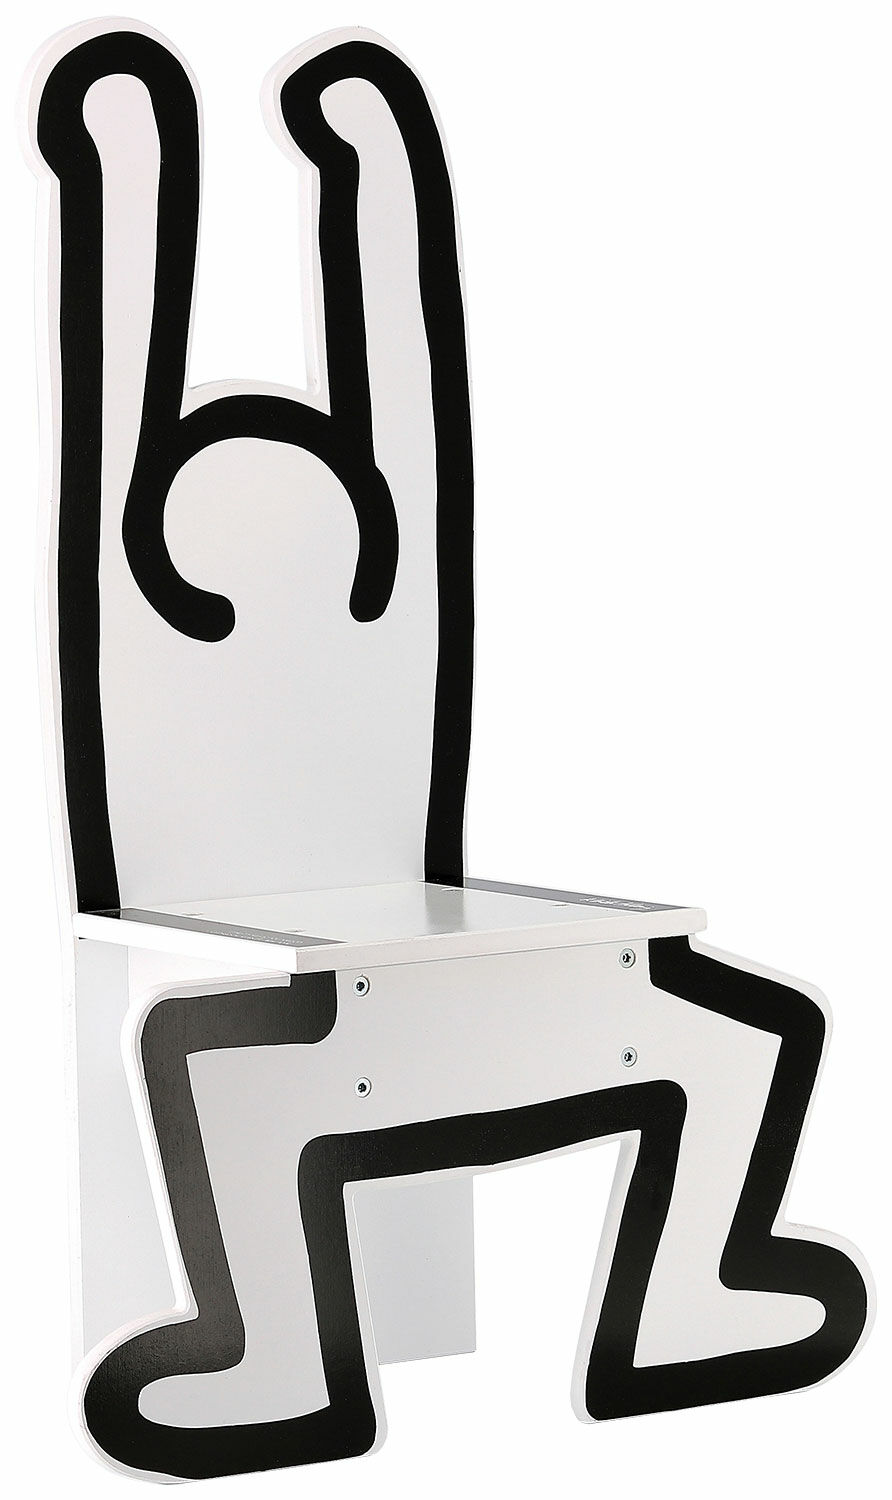 Chaise pour enfants "Keith Haring", version blanche